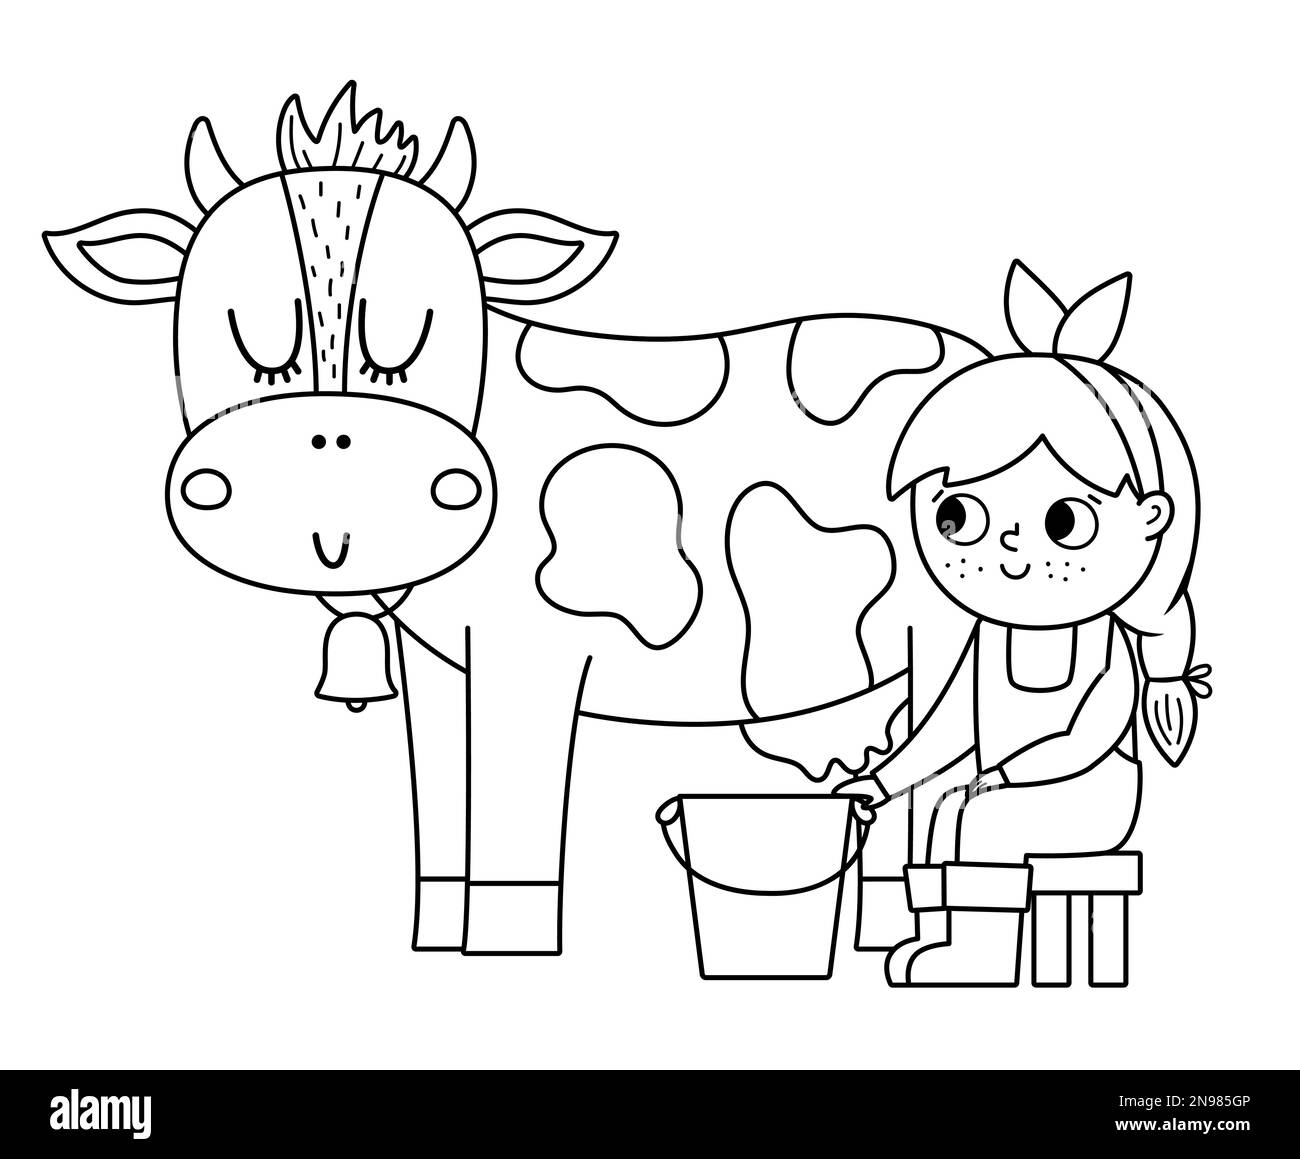 Vector black and white milkmaid icon. Outline farmer girl milking cow. Cute kid doing agricultural work. Rural country scene. Child with cute animal. Stock Vector